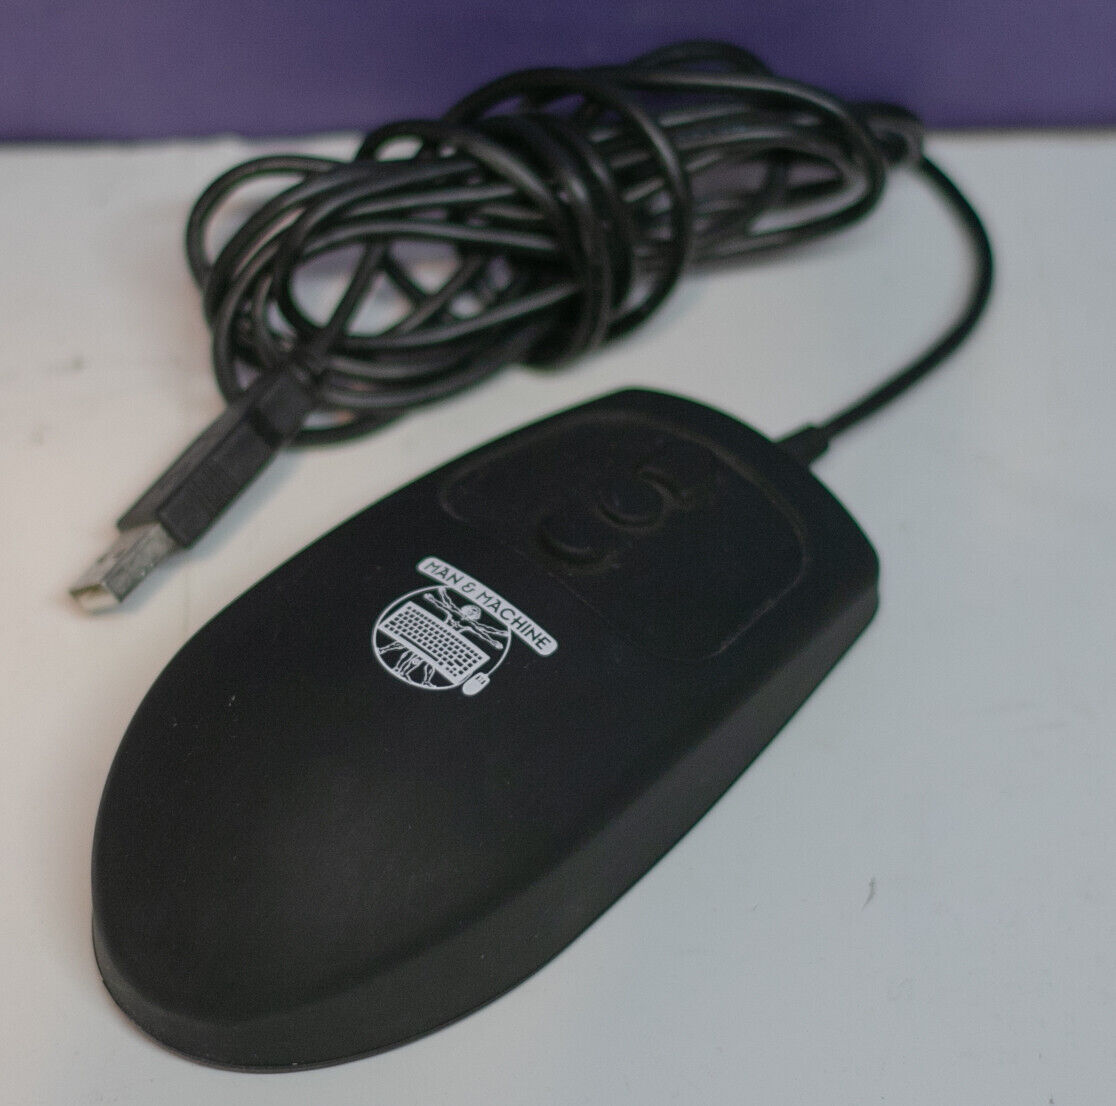 Man & Machine MM-B5 C3 Planet Mighty Mouse Black, Tested/Working, Medical Grade